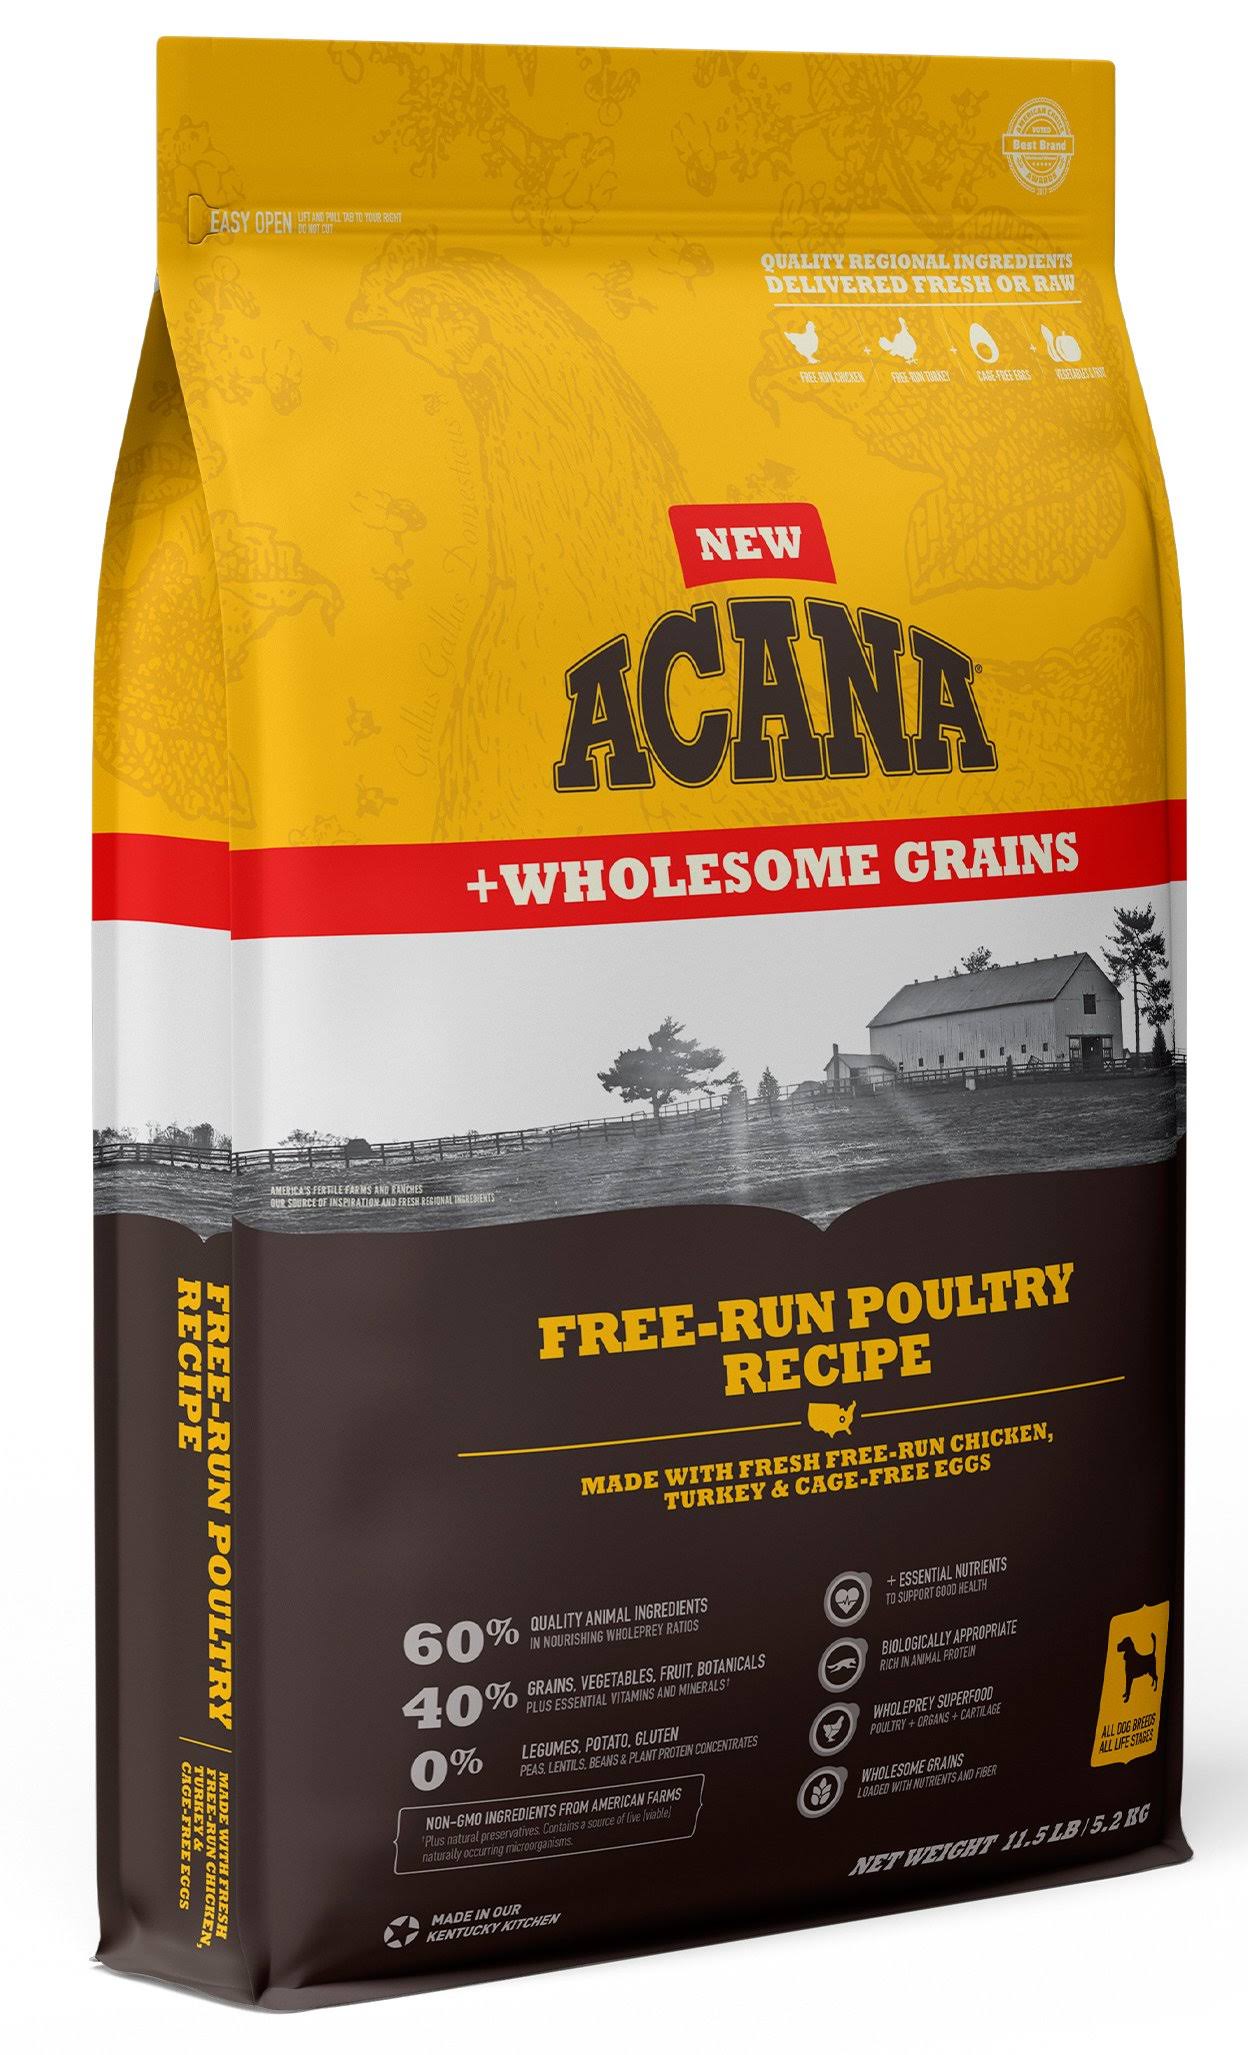 ACANA - Free-Run Poultry Wholesome Grains Recipe Dry Dog Food 4 lb